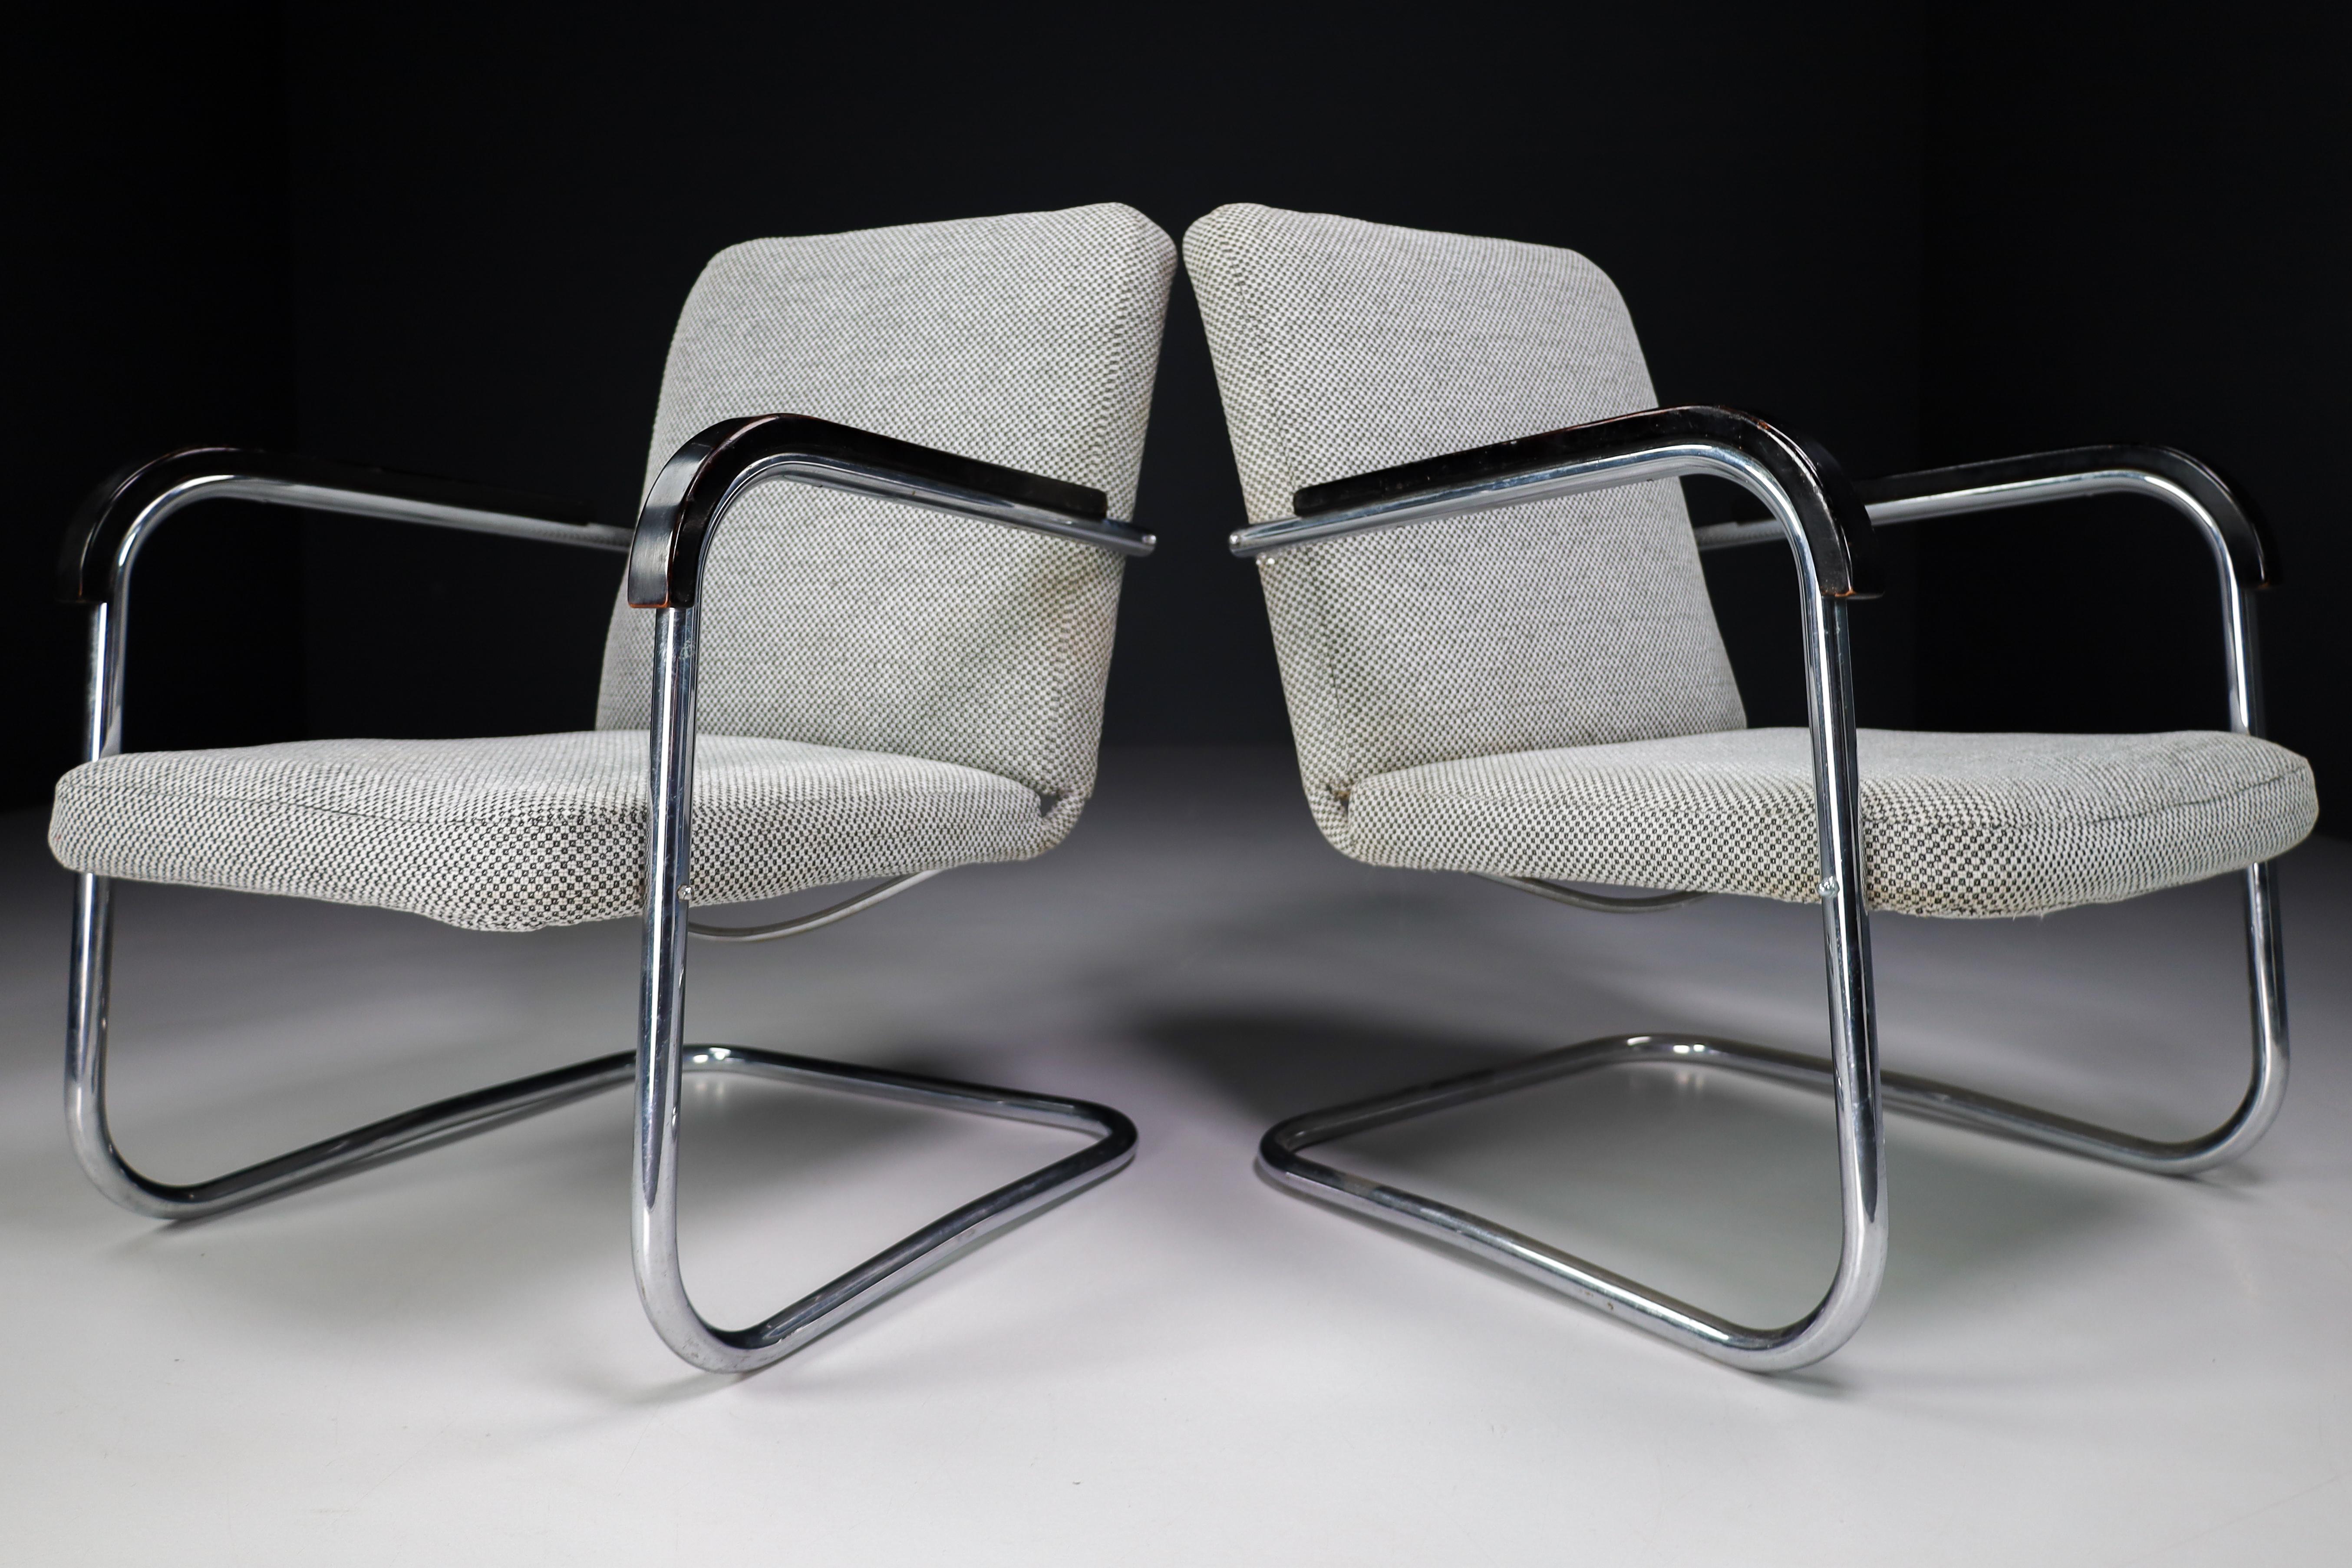 Pair of armchairs by Thonet circa 1930s midcentury Bauhaus period. These cantilever armchairs are typical for the German and Eastern Europe Bauhaus era. These armchairs has a tubular steel frame and is Re-upholstered with a grey fabric. The original